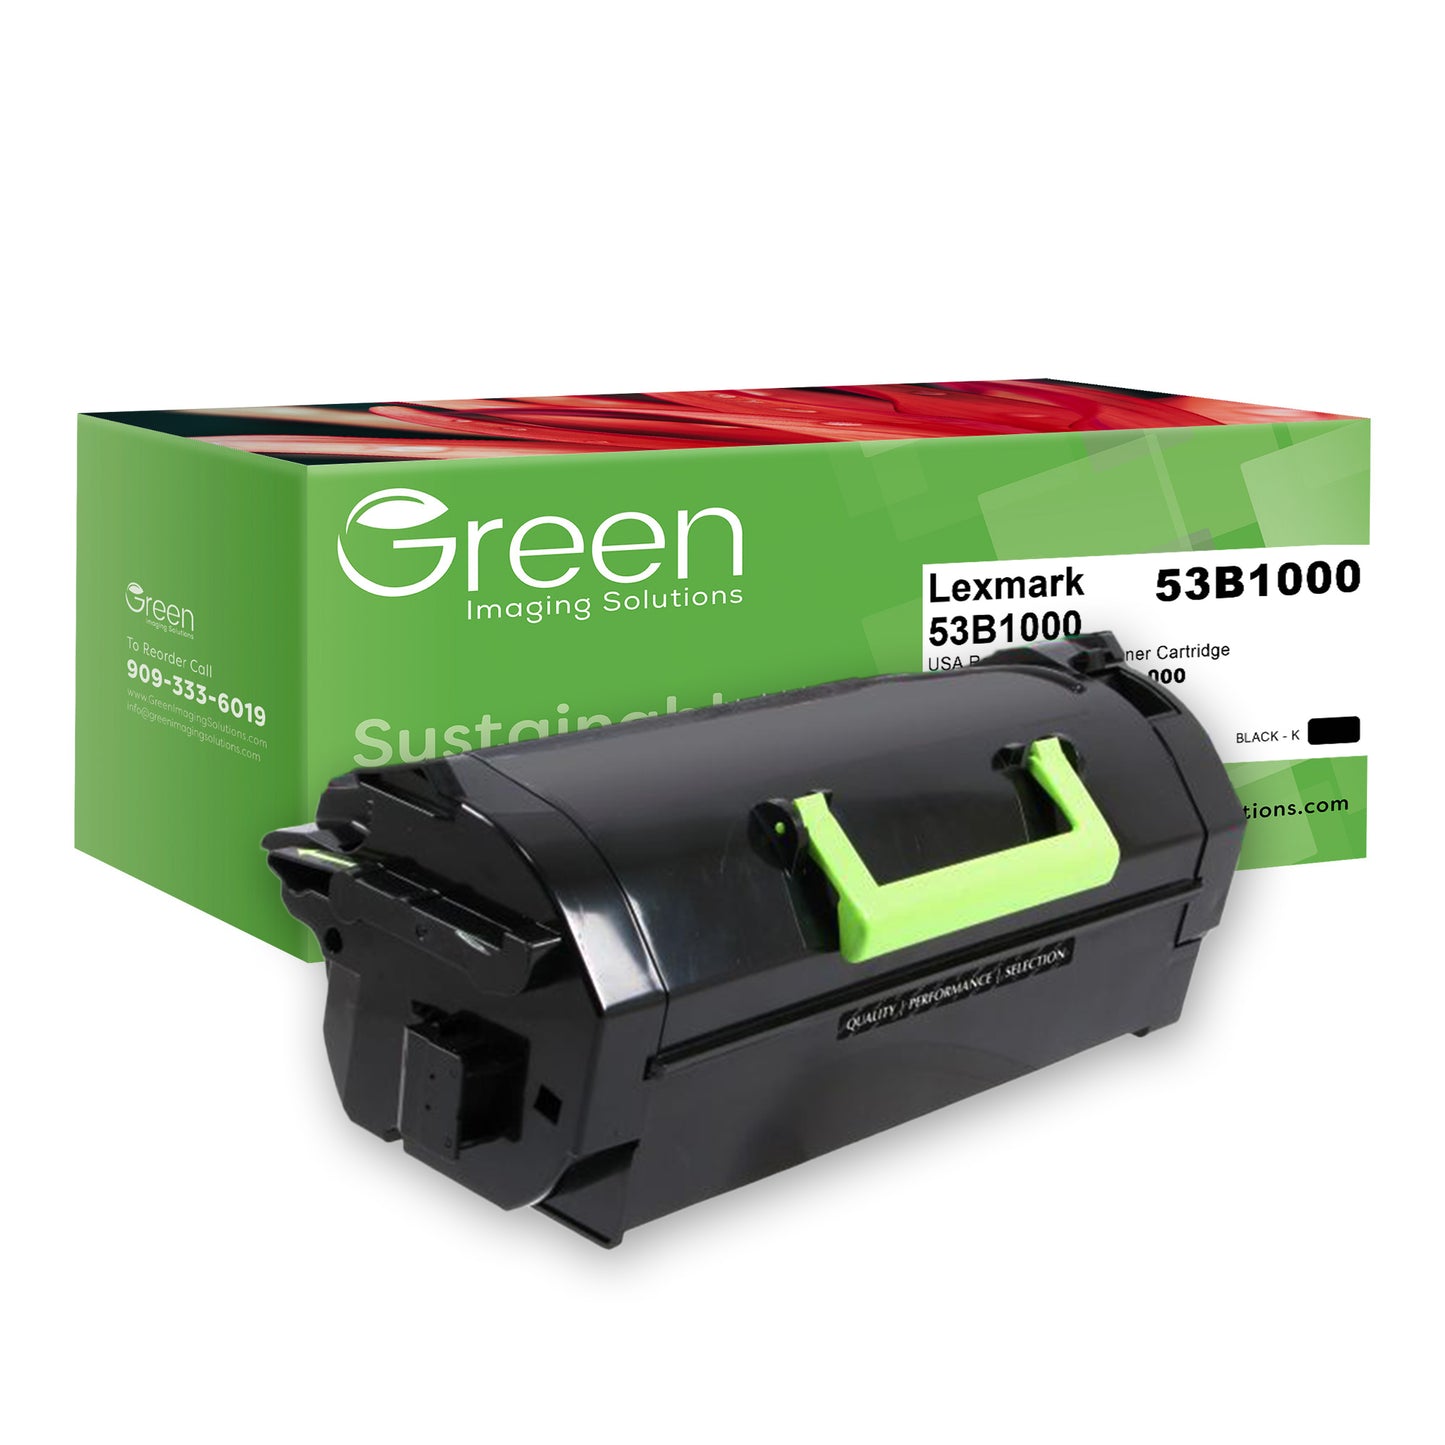 Green Imaging Solutions USA Remanufactured Toner Cartridge for Lexmark MS817